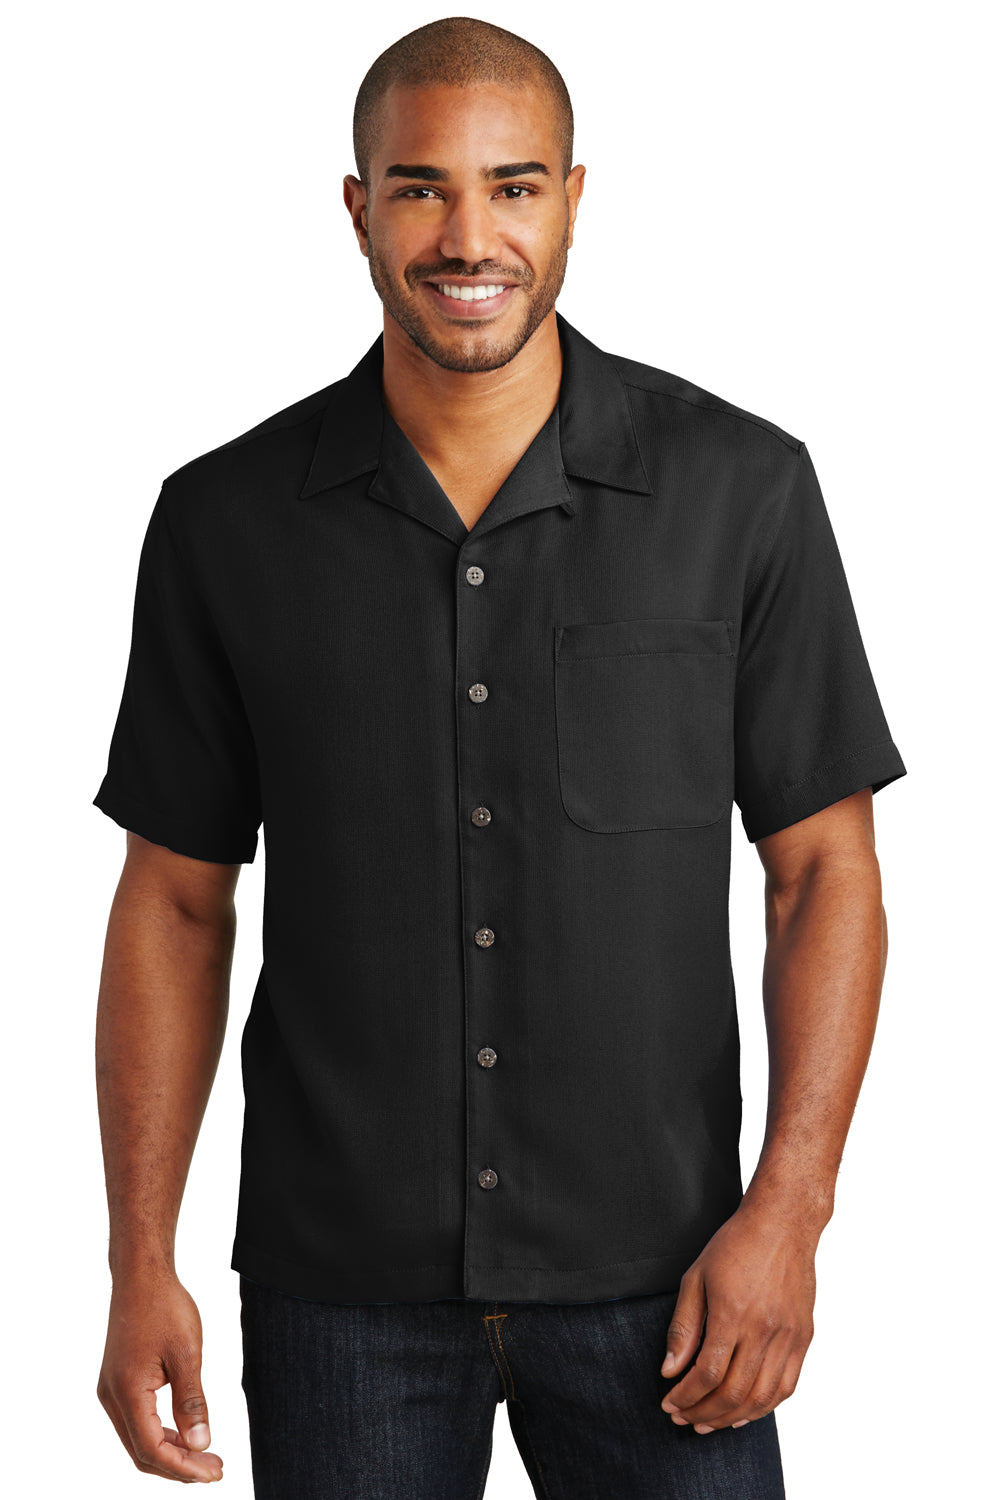 Port Authority S535 Mens Easy Care Stain Resistant Short Sleeve Button Down Camp Shirt w/ Pocket Black Front